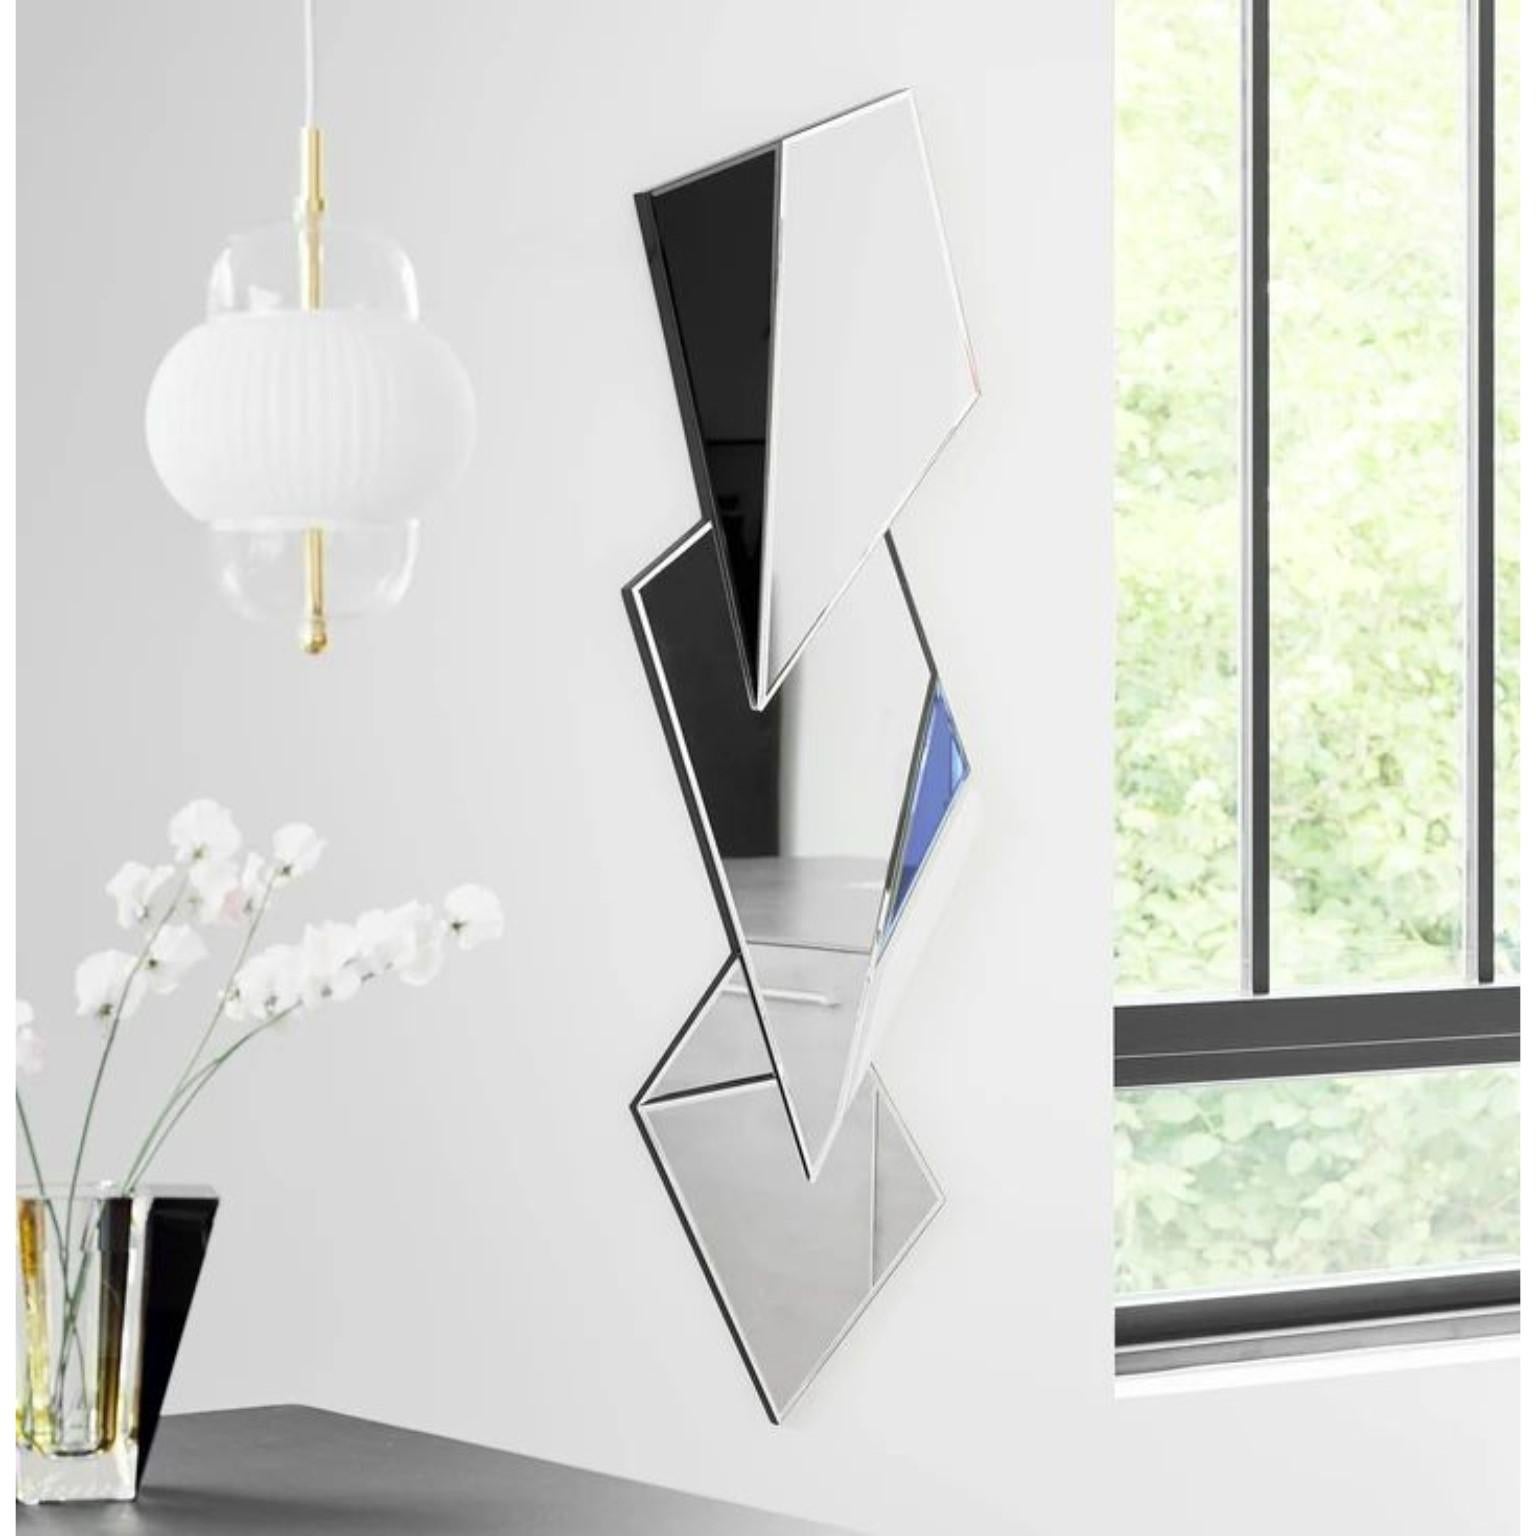 Bellatrix mirror 
Dimensions: W 58.2 x D 2.5 x H 132 cm
Material: 4 mm faceted mirror on black painted MDF
Weight: 8 kg

Bellatrix & Polaris mirrors feature searing looks inspired by the temptation of geometric lines. They are marked by